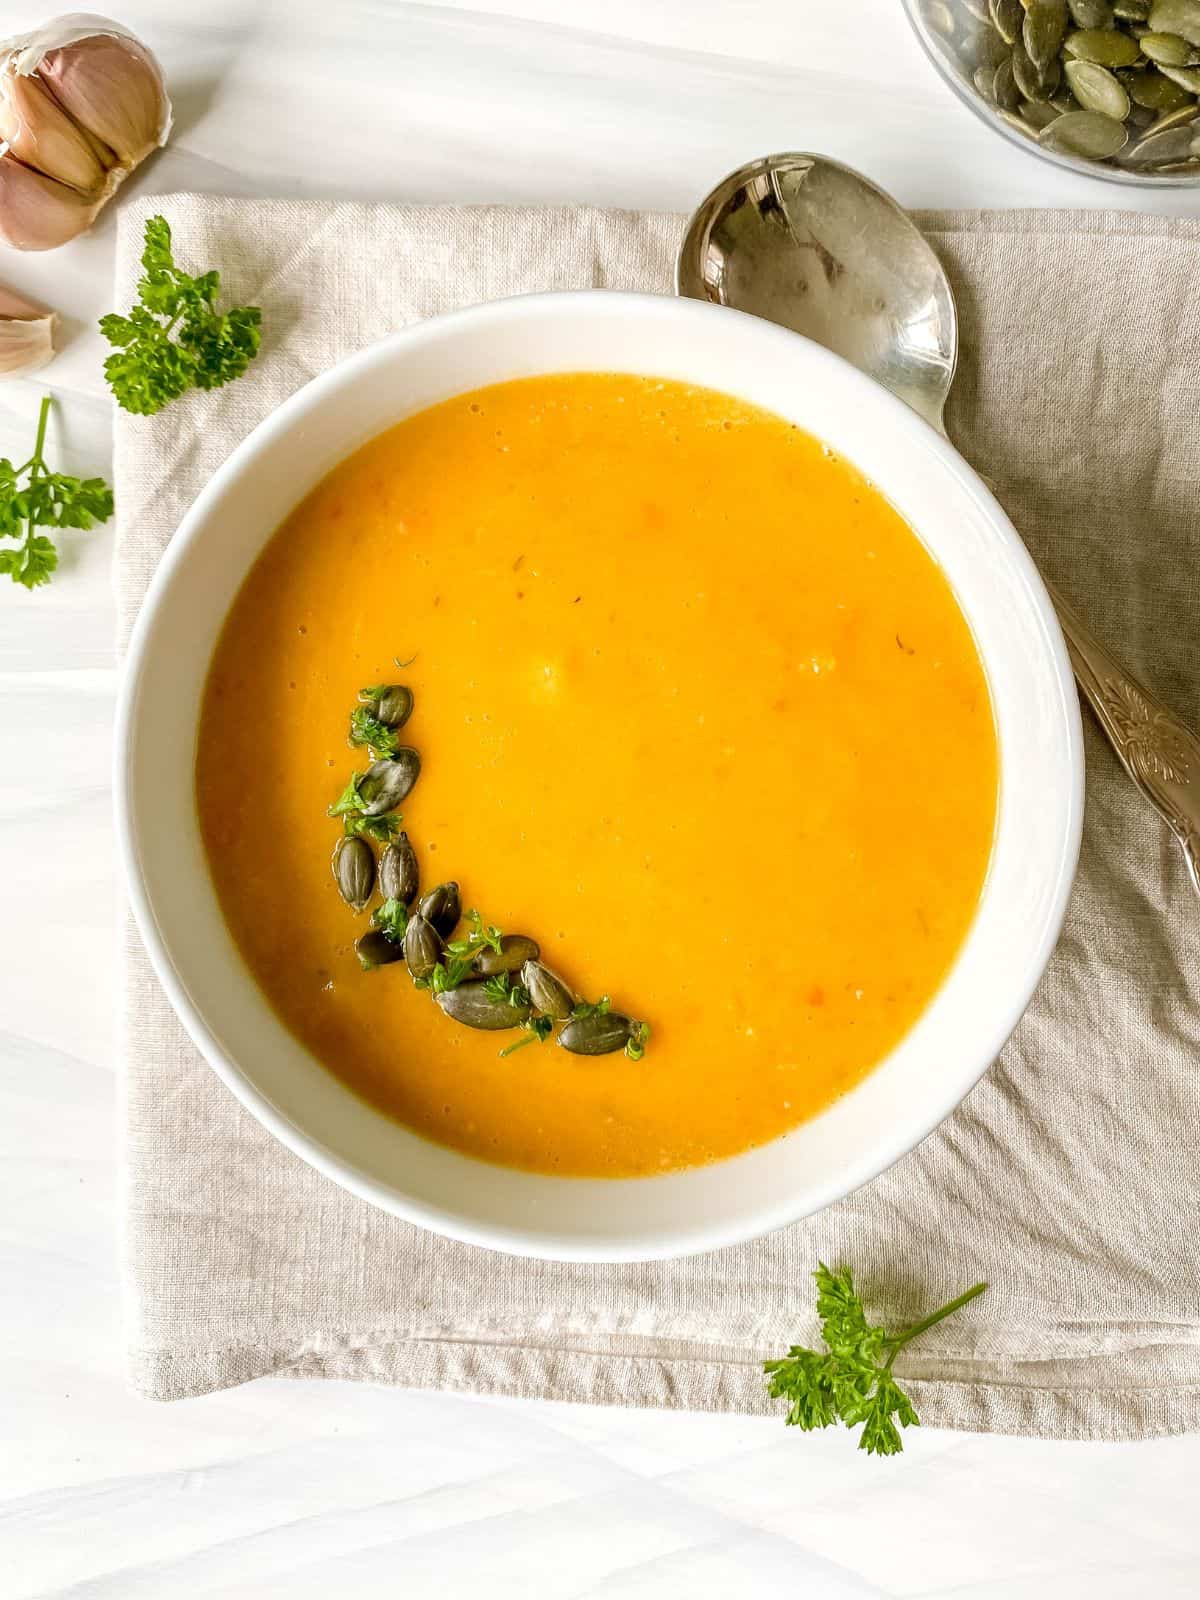 butternut squash and red pepper soup in a white bowl on a beige cloth next to a spoon, herbs and garlic cloves.